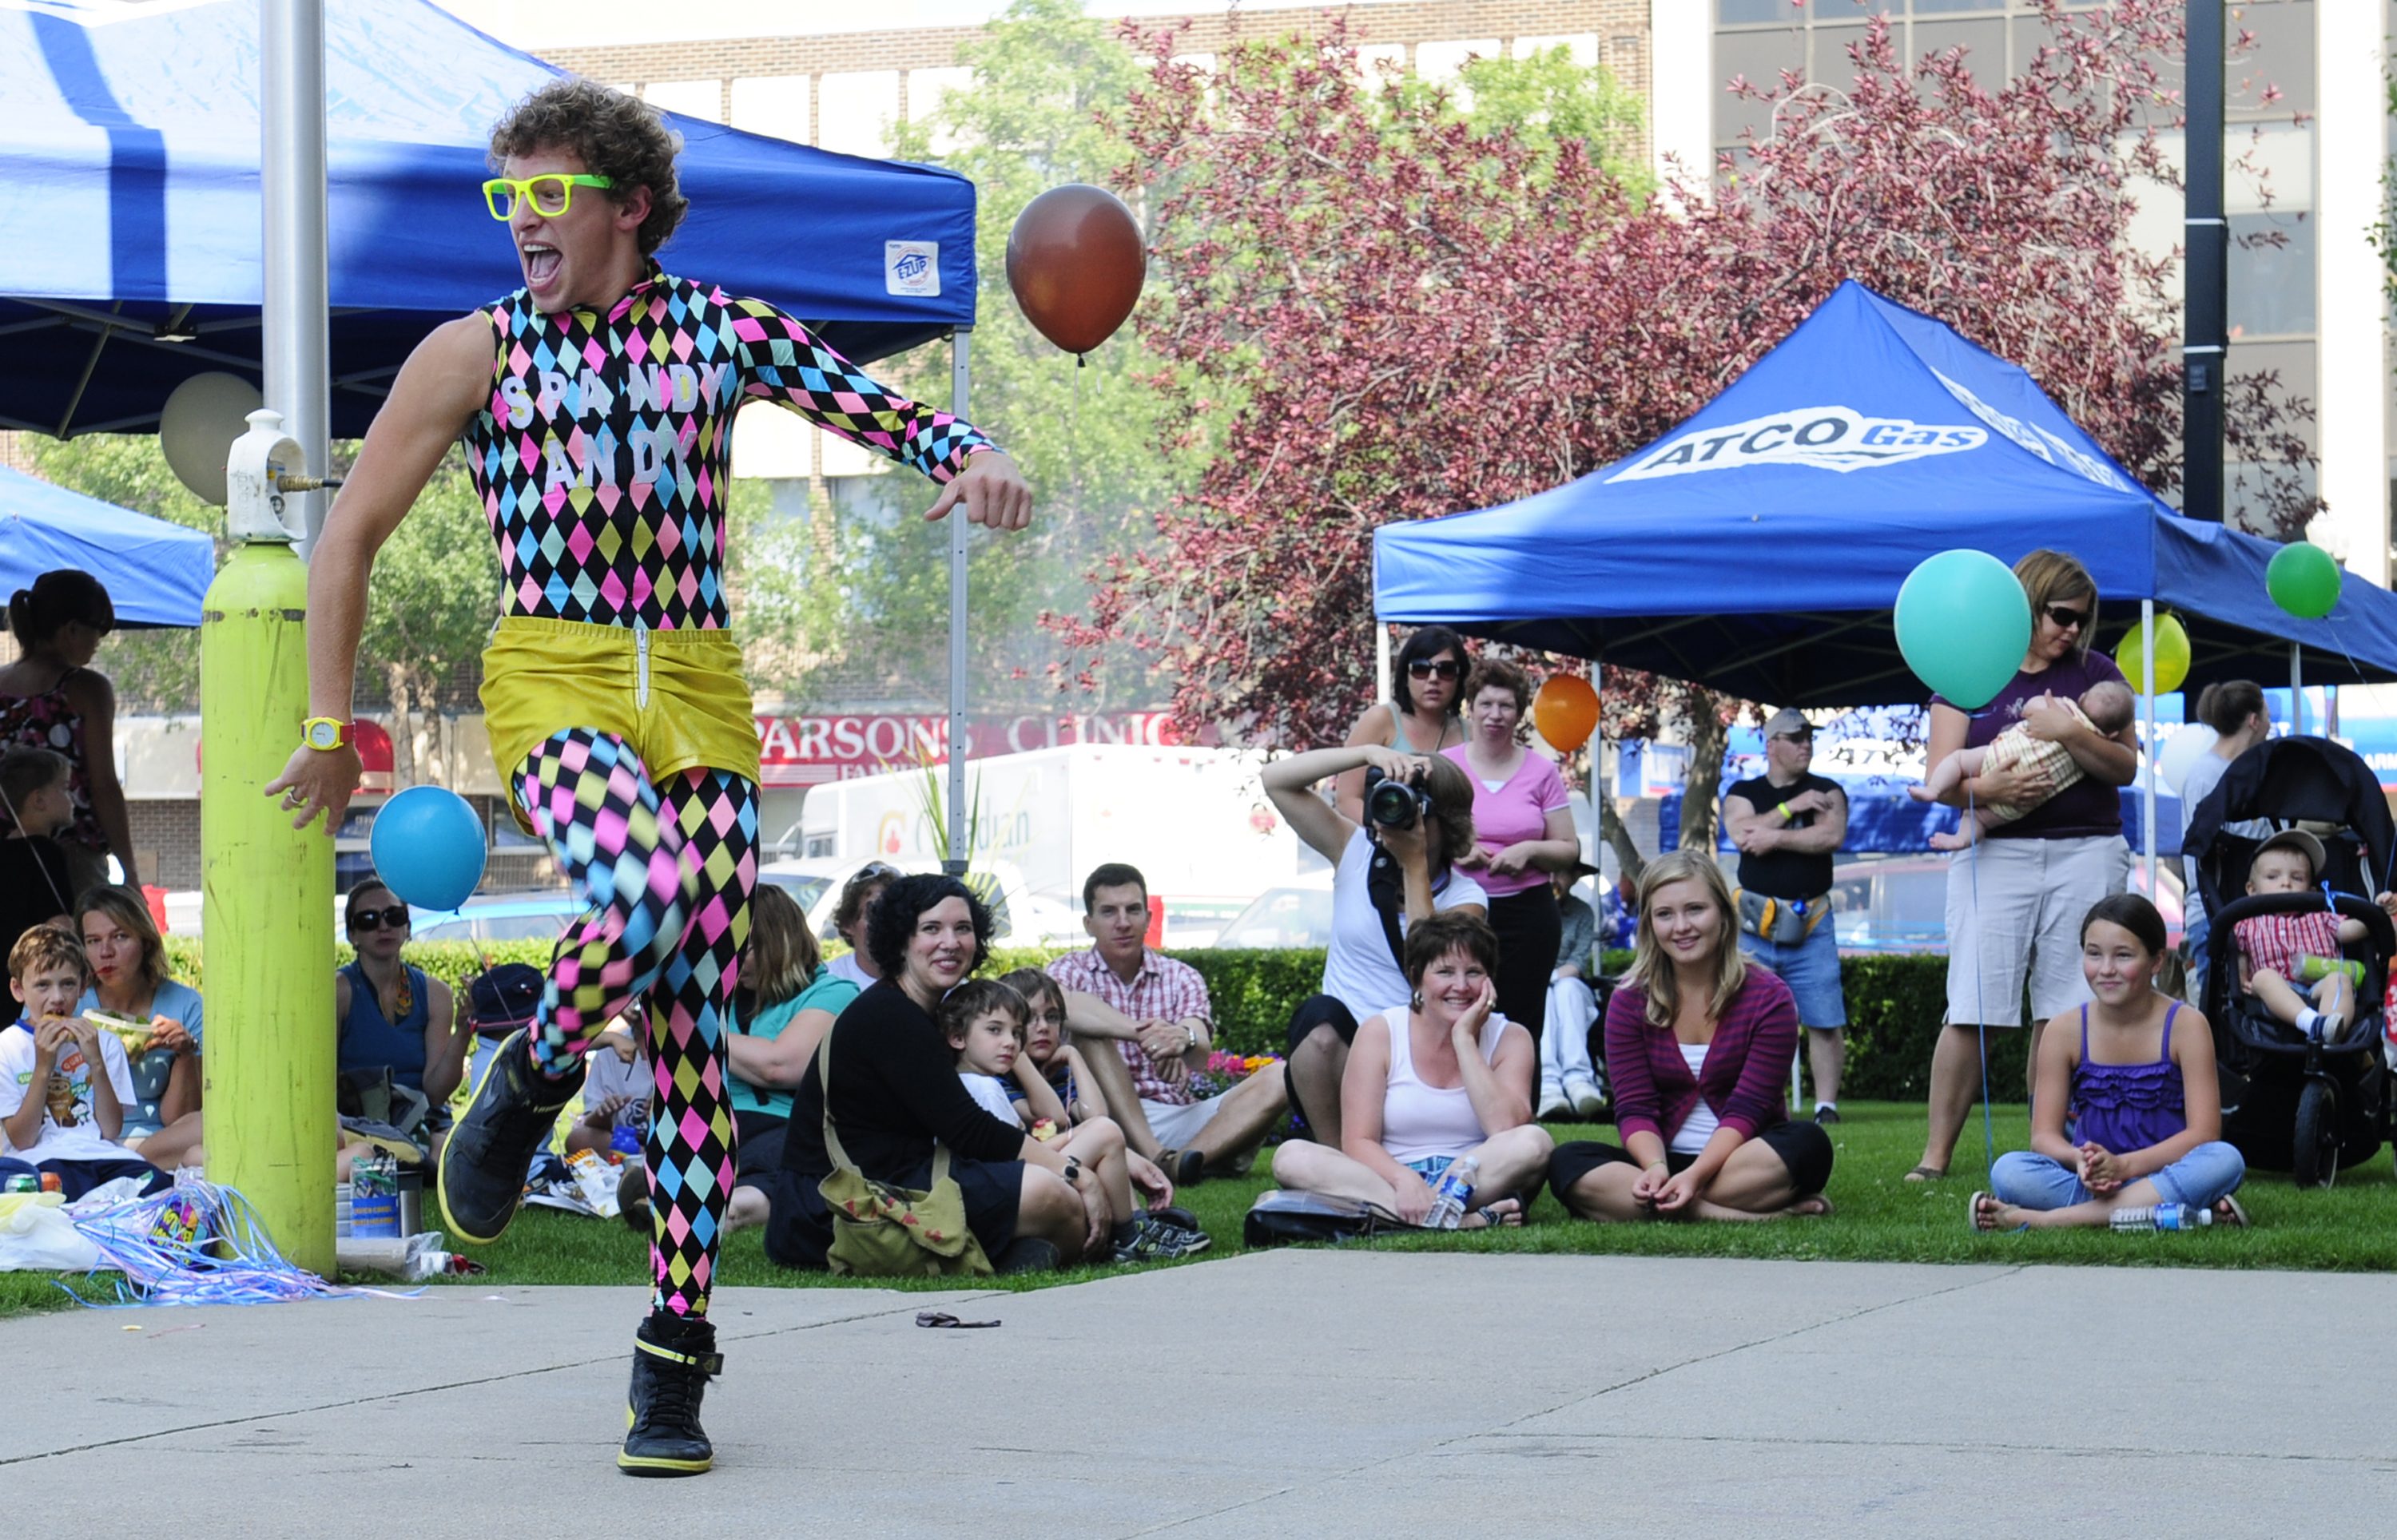 UNSTOPPABLE- Spandy Andy will be one of the many performers during this year's rendition of CentreFest this weekend in downtown Red Deer.